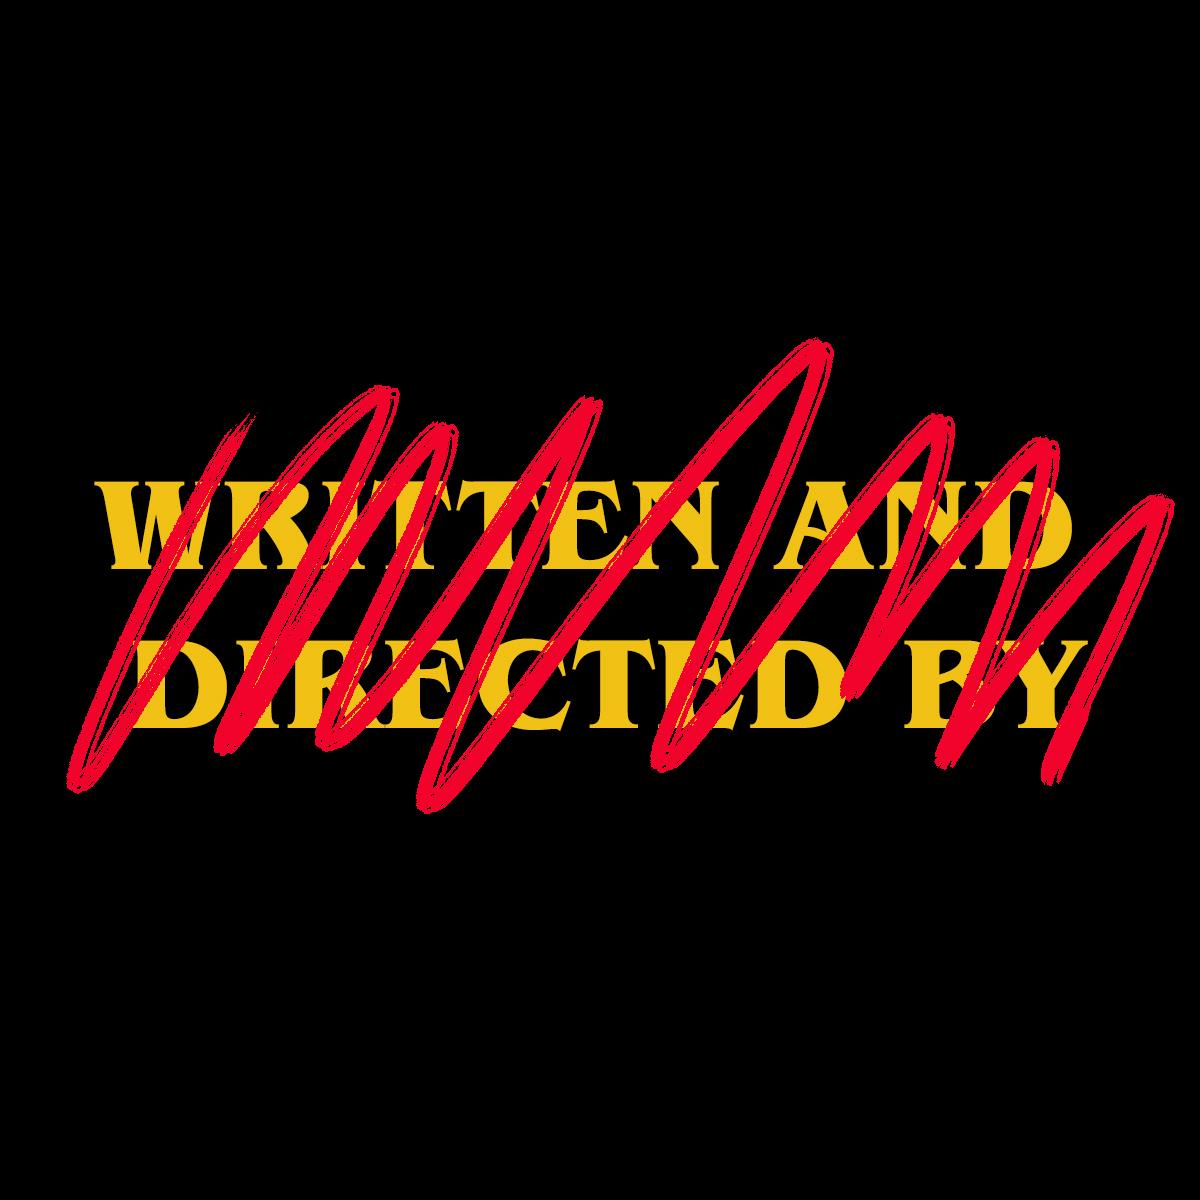 A black square with handwritten red ink scribbled over yellow text: “Written And Directed By”.